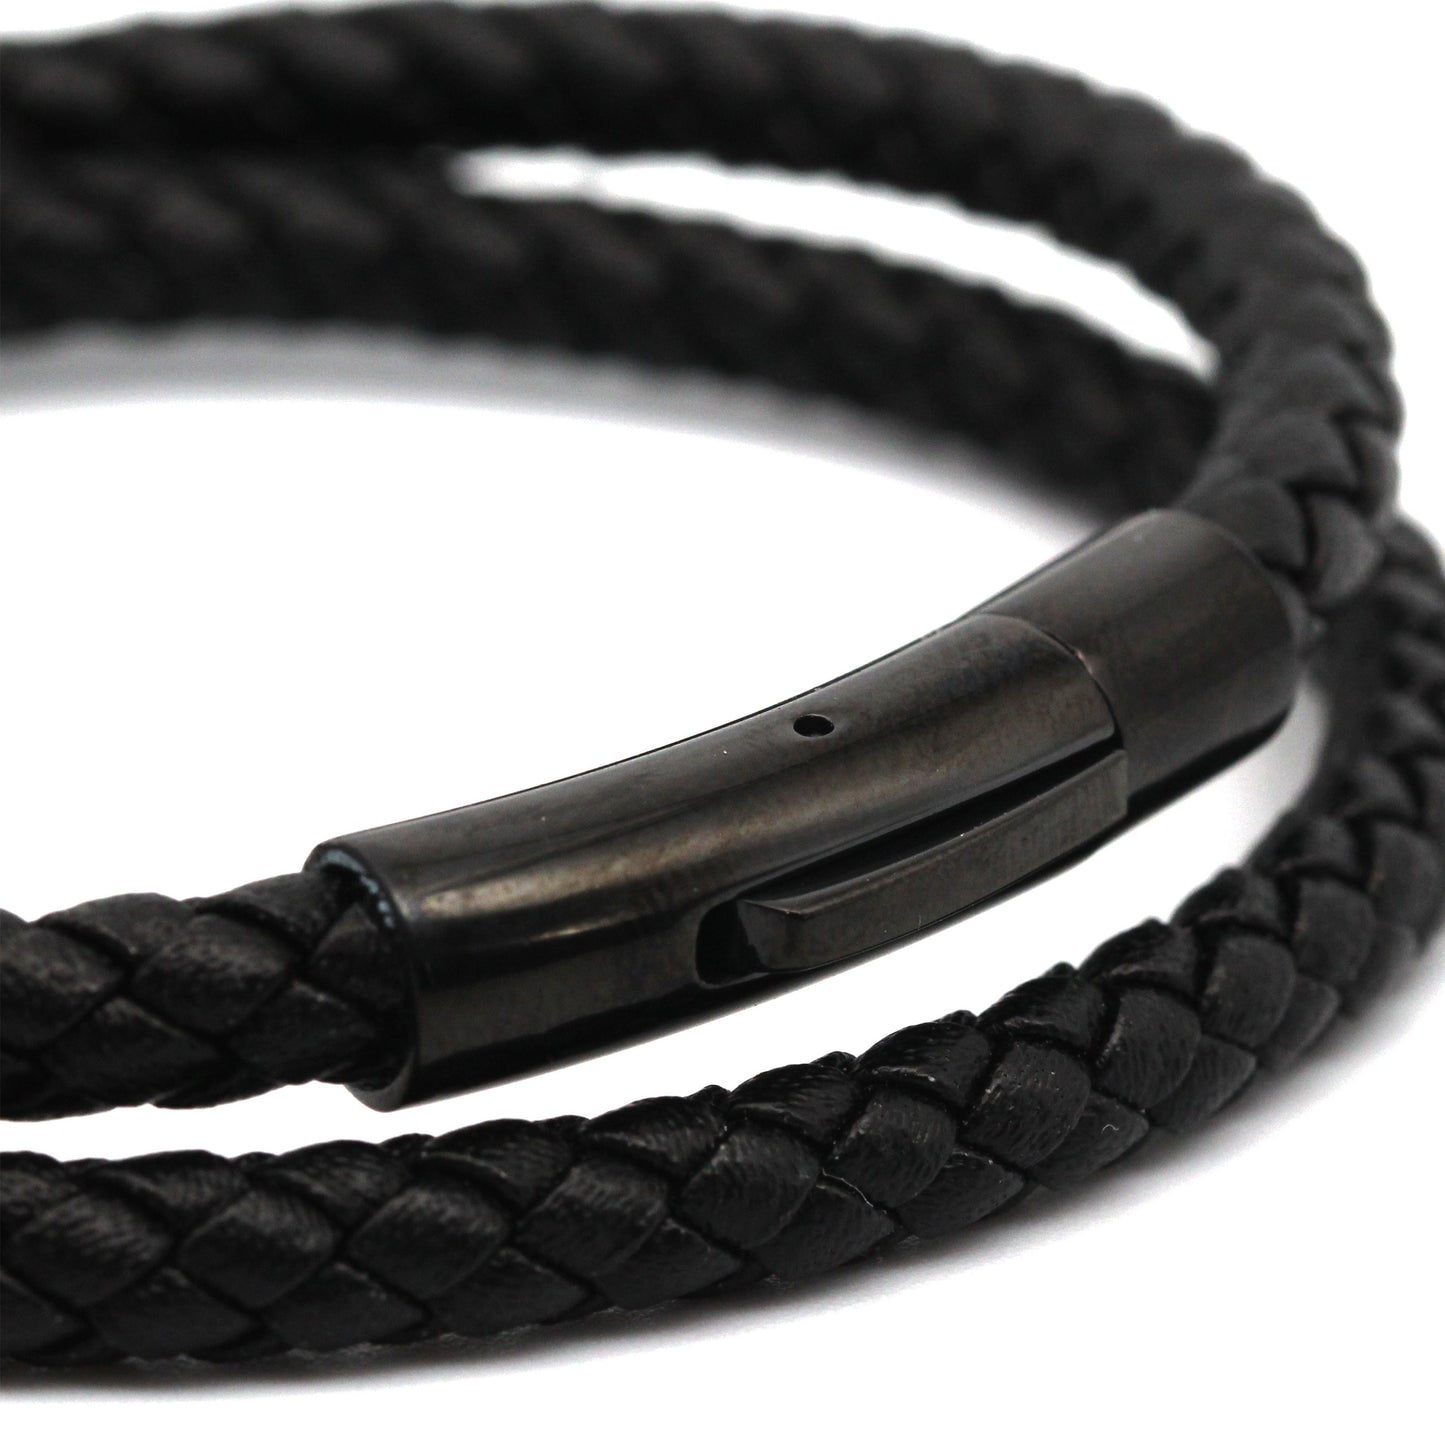 Maximo All Black Leather Loop Band